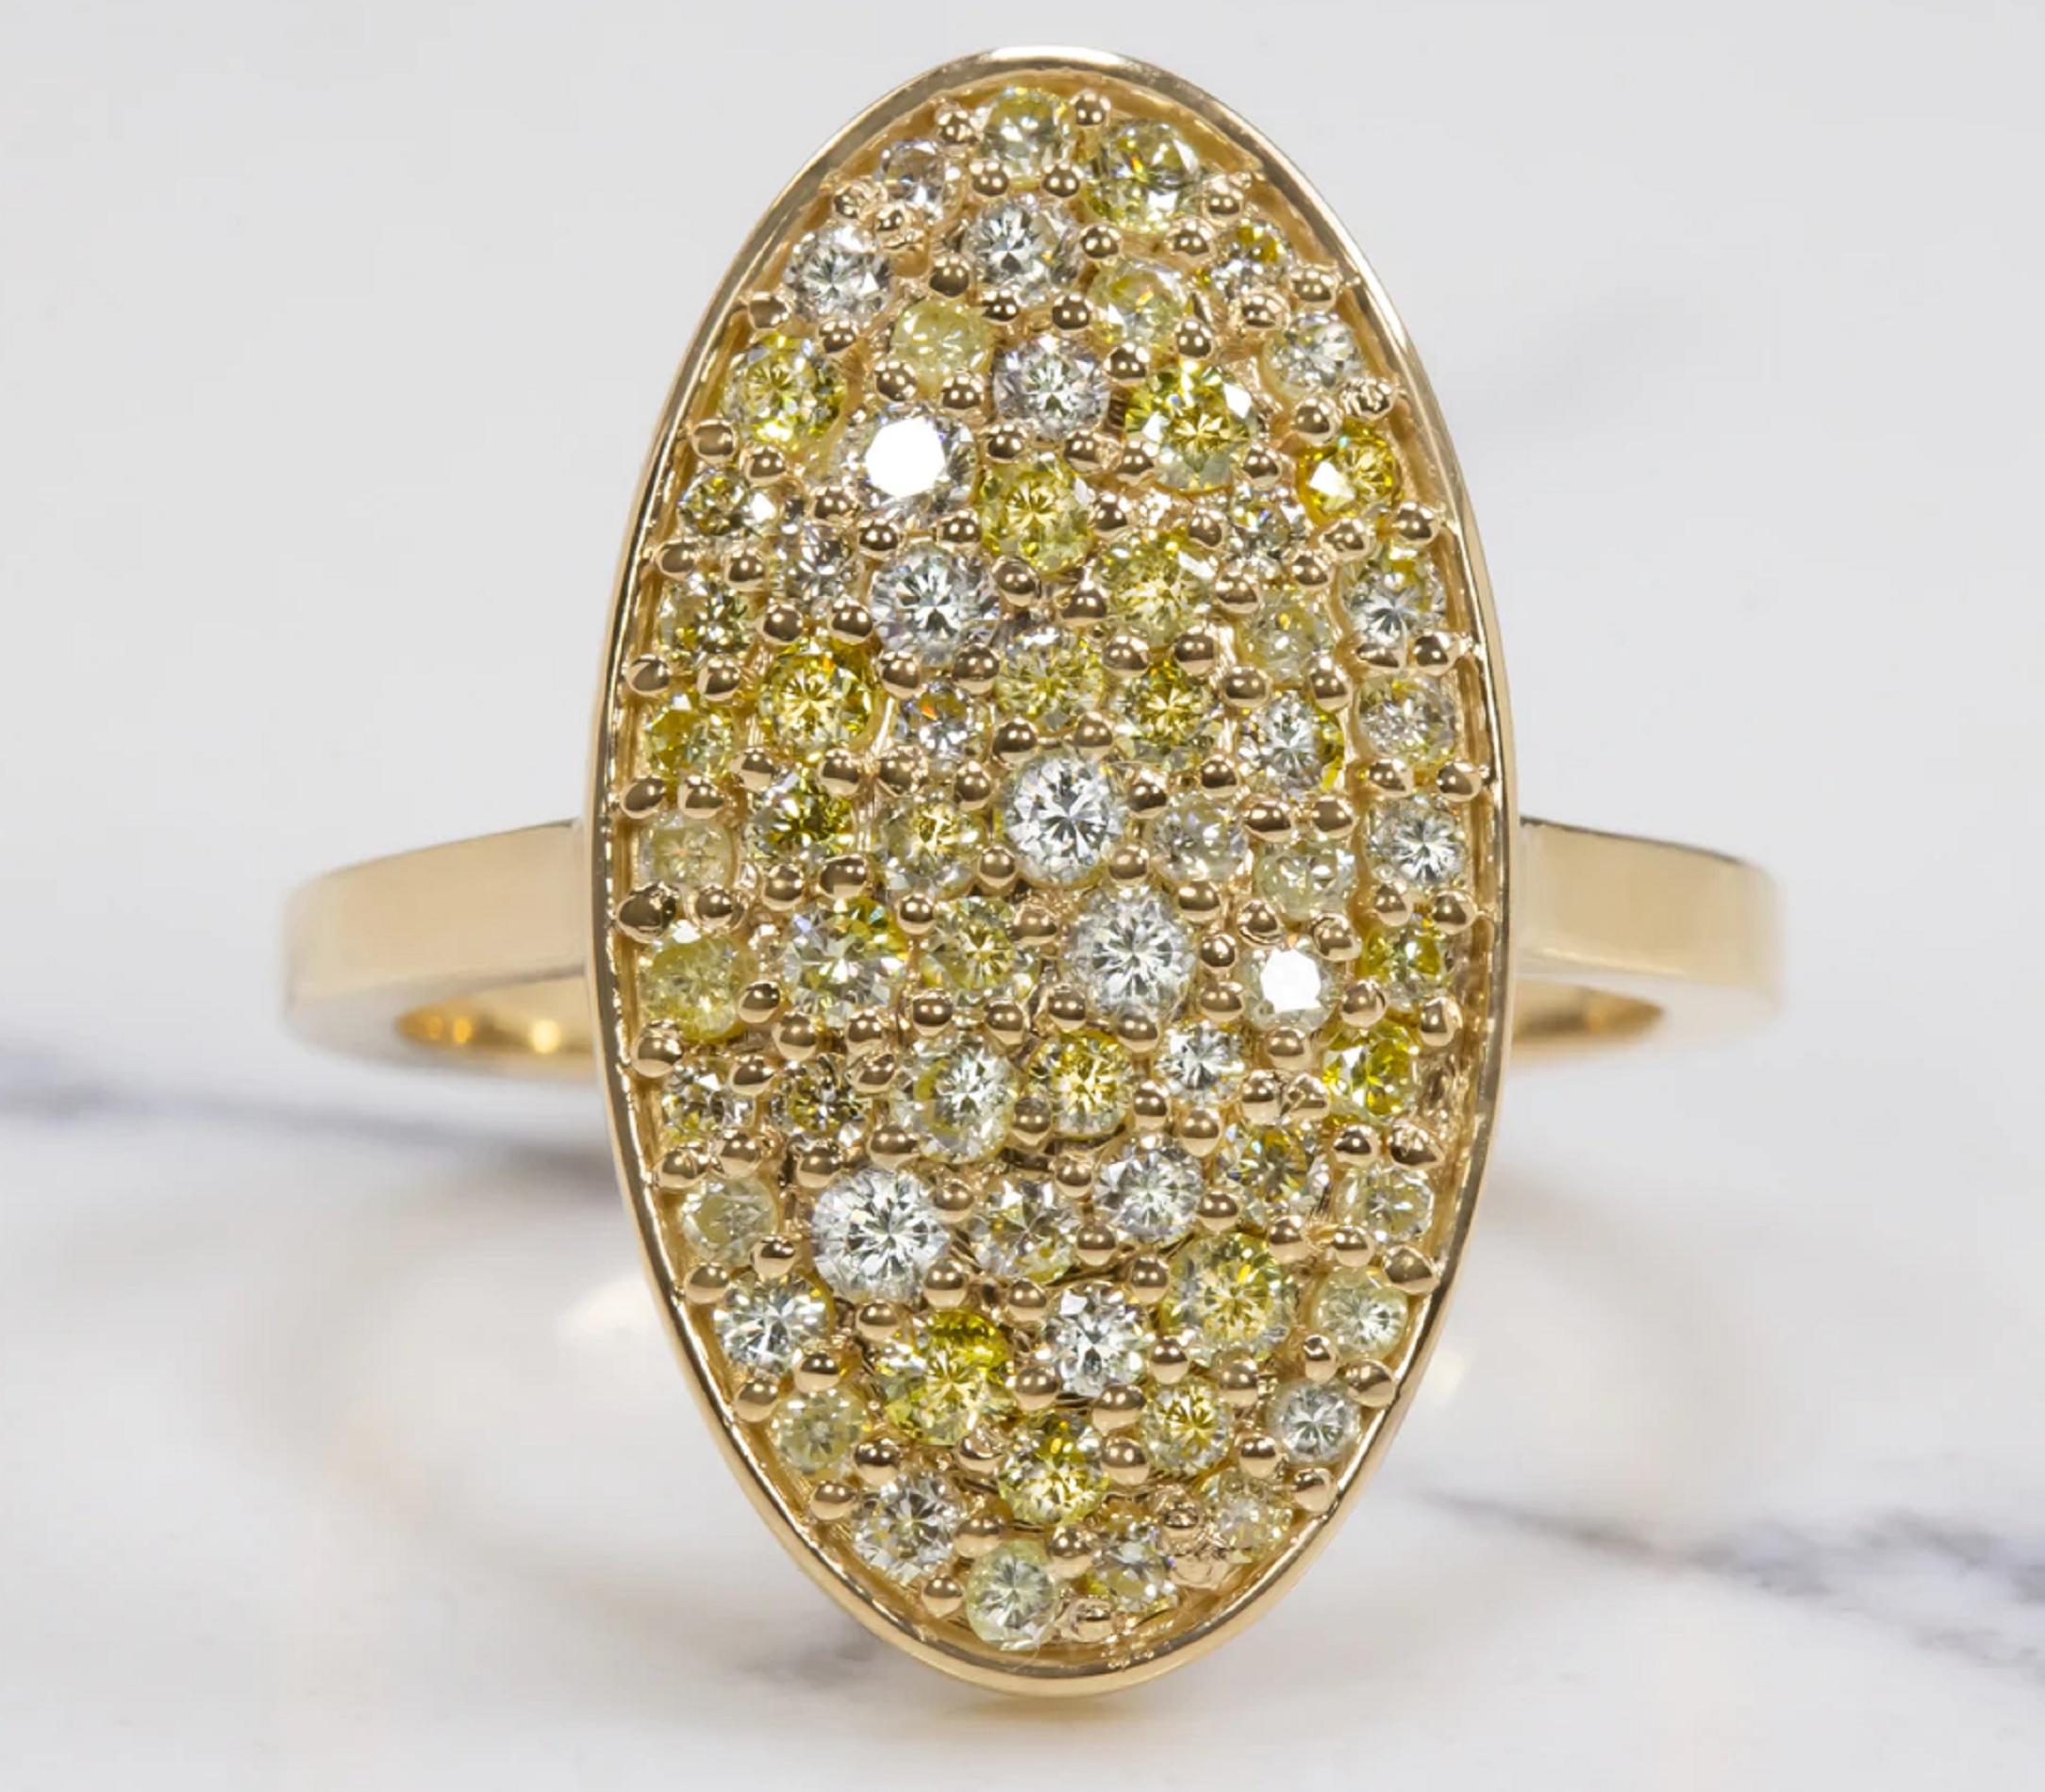 Amazing ring designed with 2 carats of yellow and white diamonds arranged in a beautifully varied display! Ranging in color from a bright white, to a buttery hue, to a bright canary, the vibrant diamonds were carefully selected to create a gorgeous,